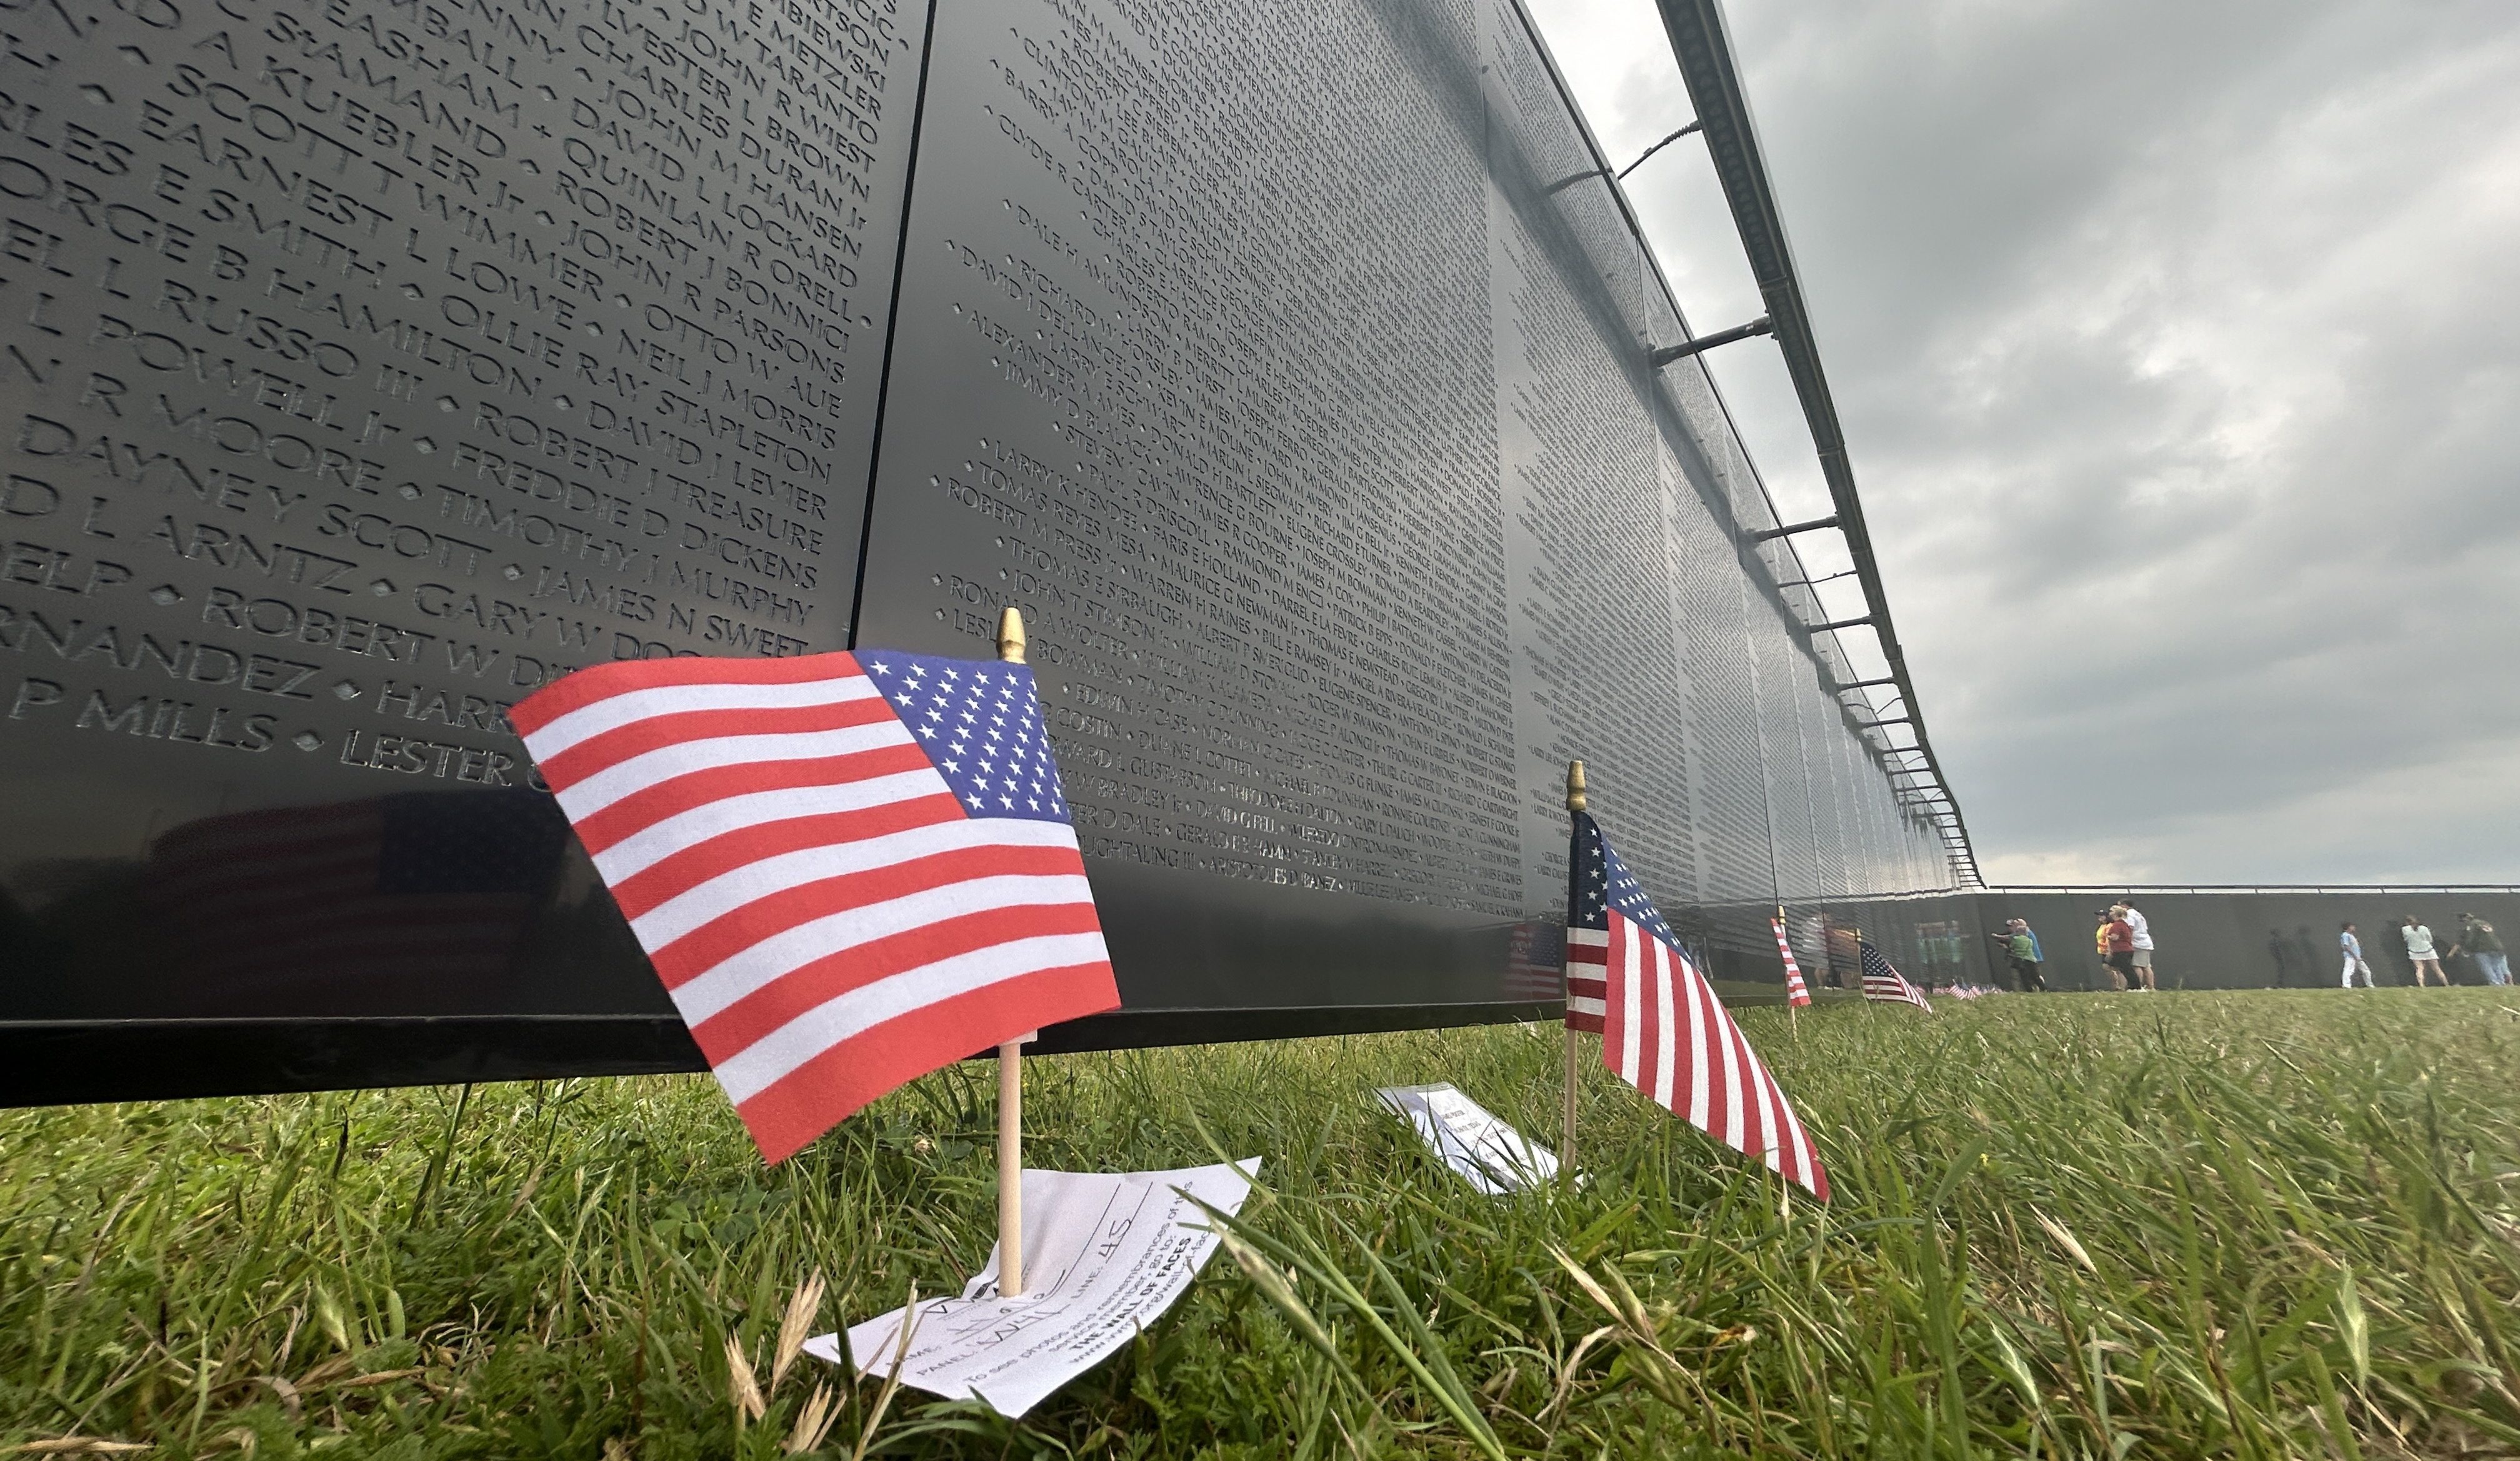 The Wall That Heals: Honorary exhibit for Vietnam War veterans comes
to North Texas